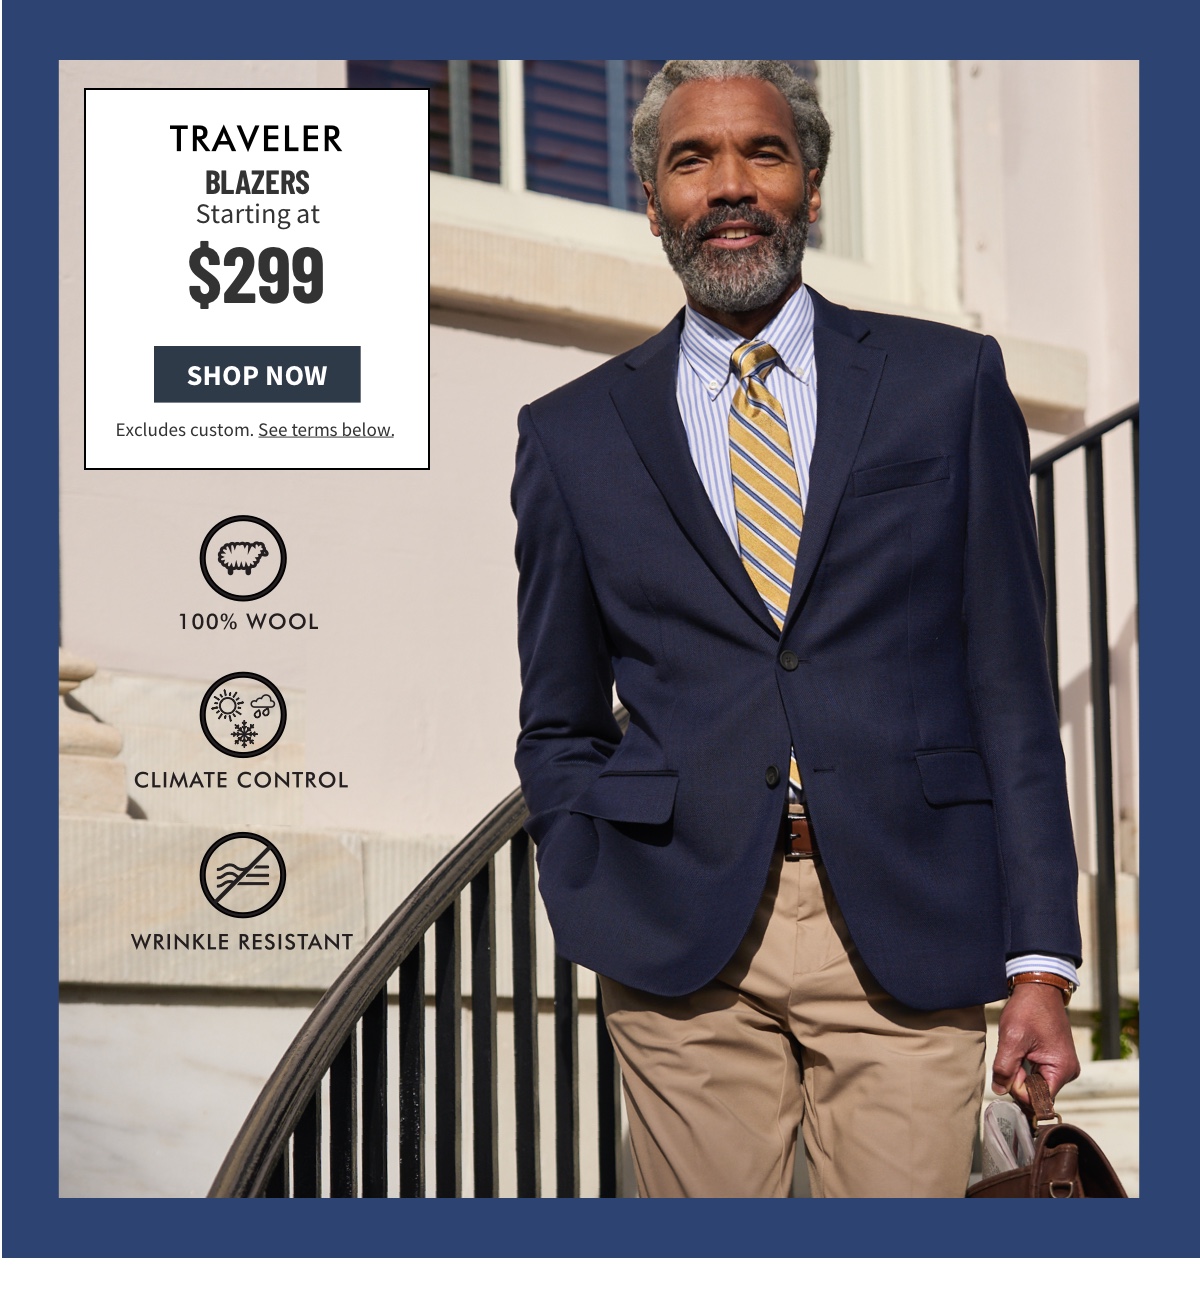 Traveler Blazers Starting at $299 Shop Now Excludes custom. See terms below. 100% Wool Climate Control Wrinkle Resistant